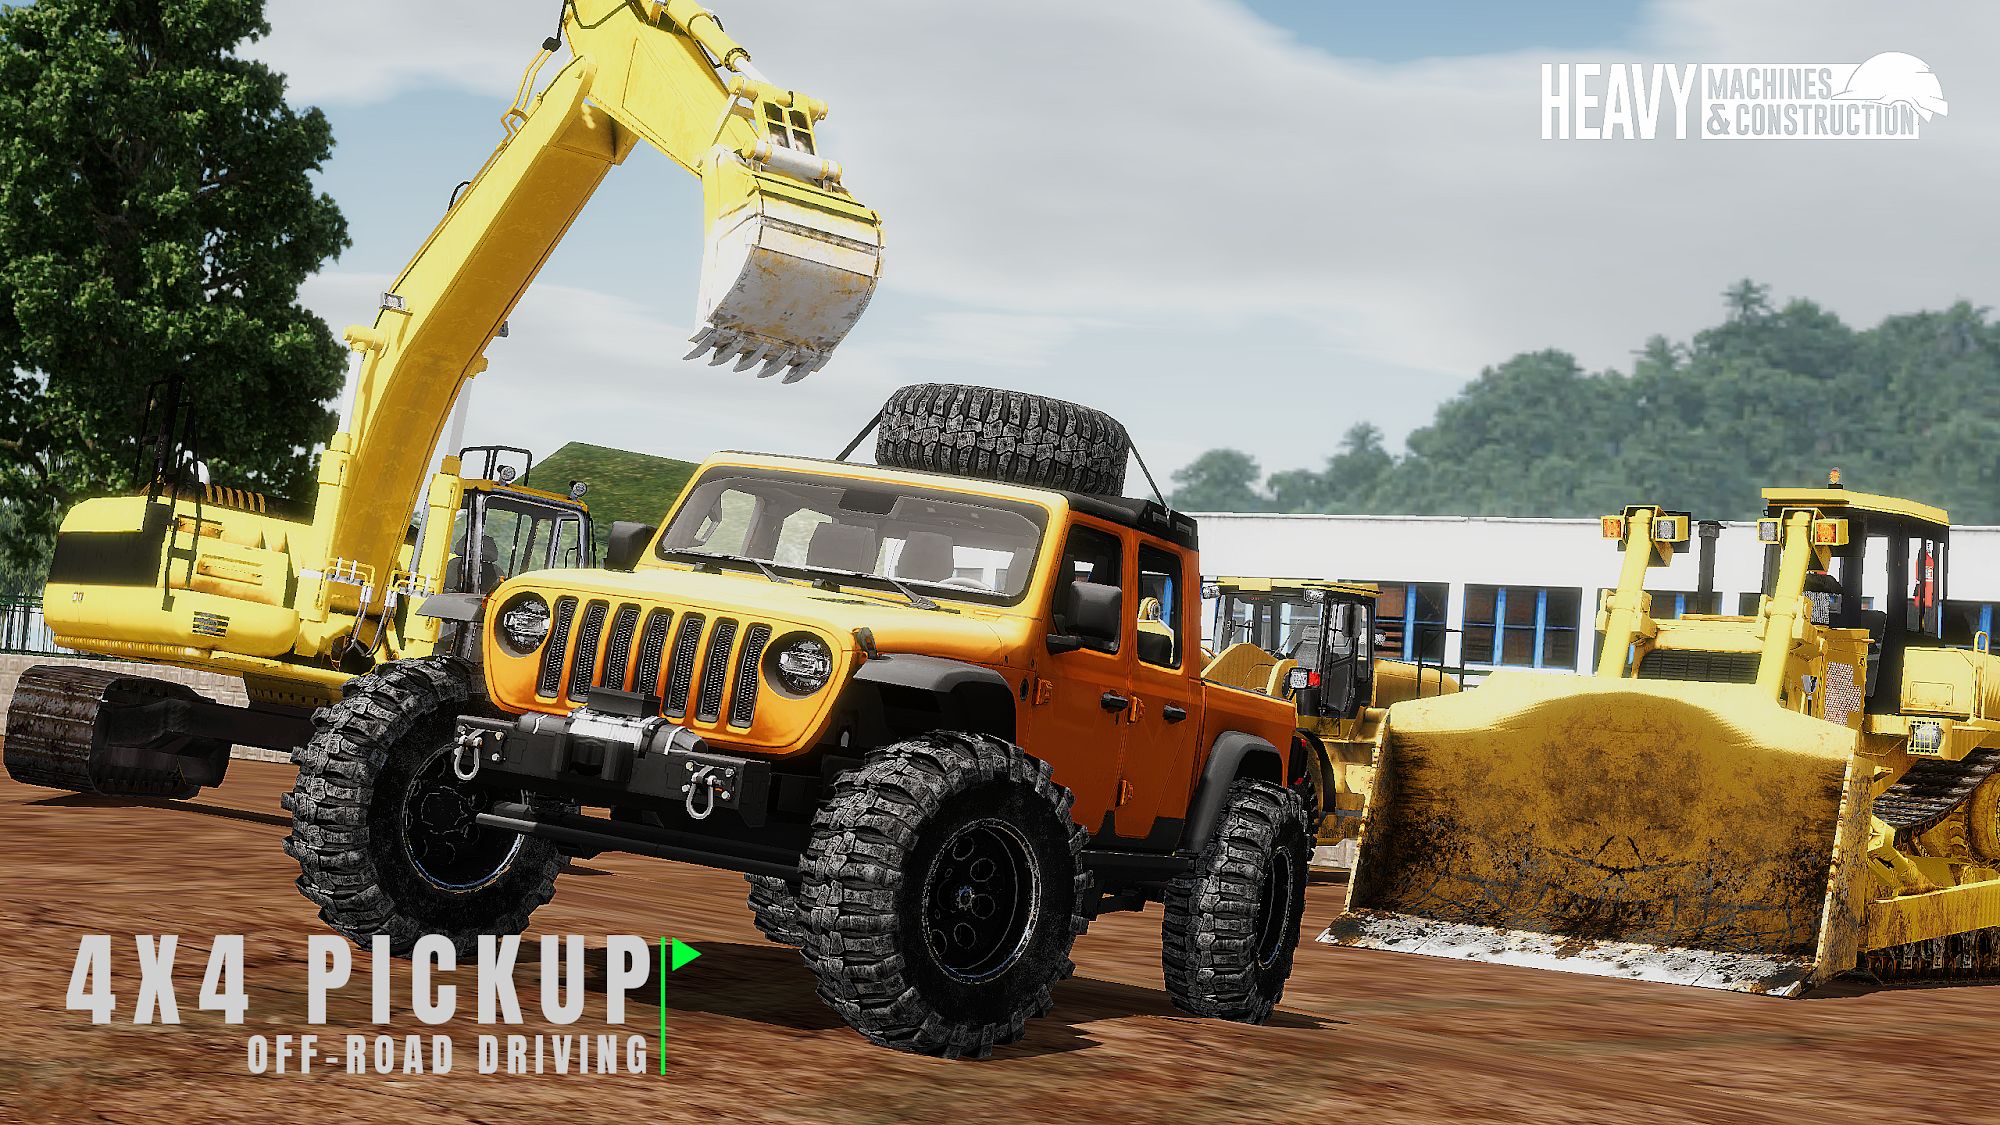 Full version of Android Building game apk Heavy Machines & Construction for tablet and phone.